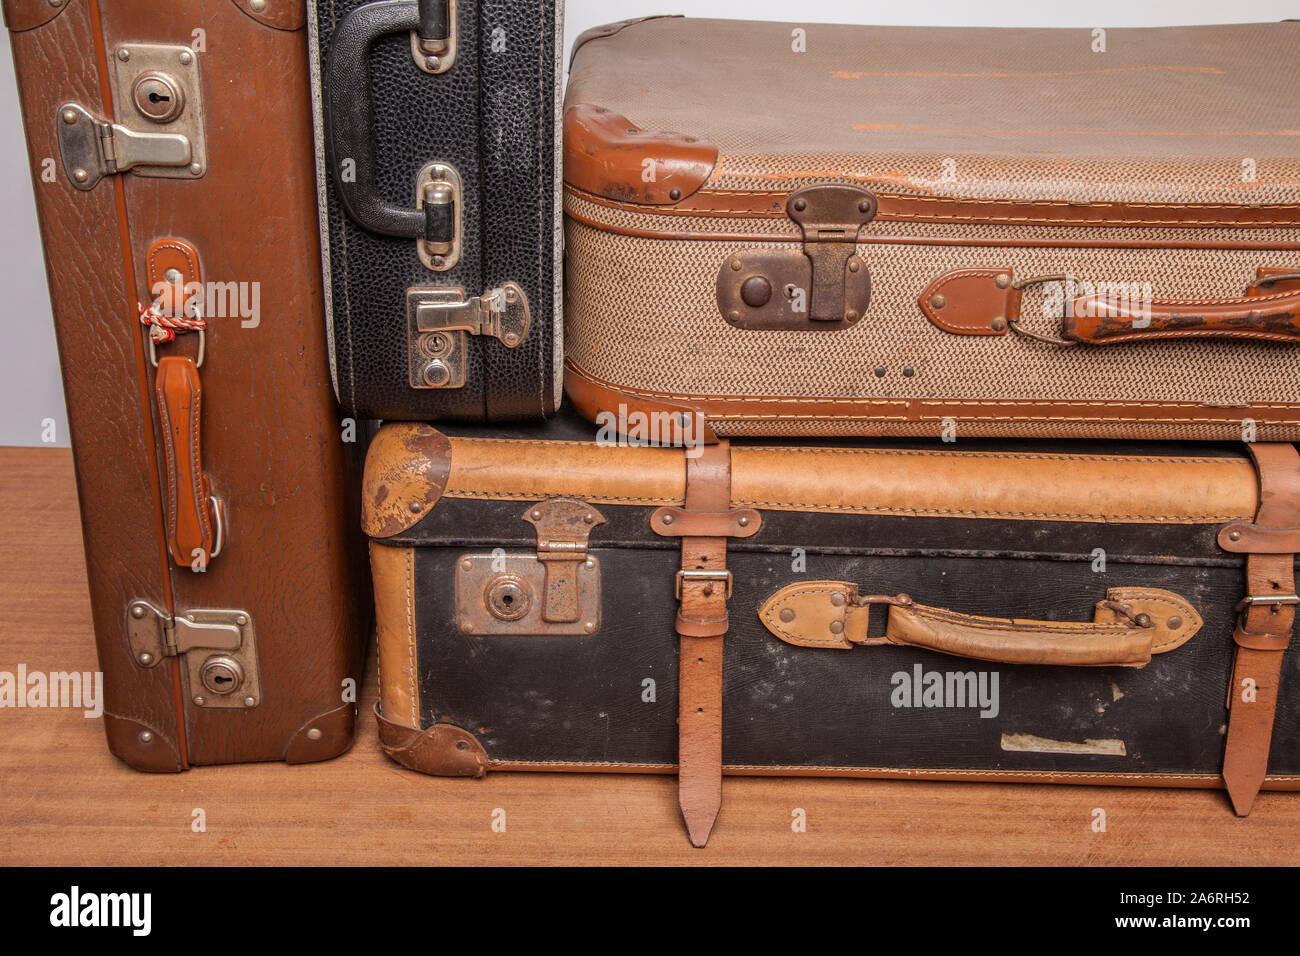 Old, retro, suitcases lie on the table with white background. Obsolete suitcase. Stock Photo